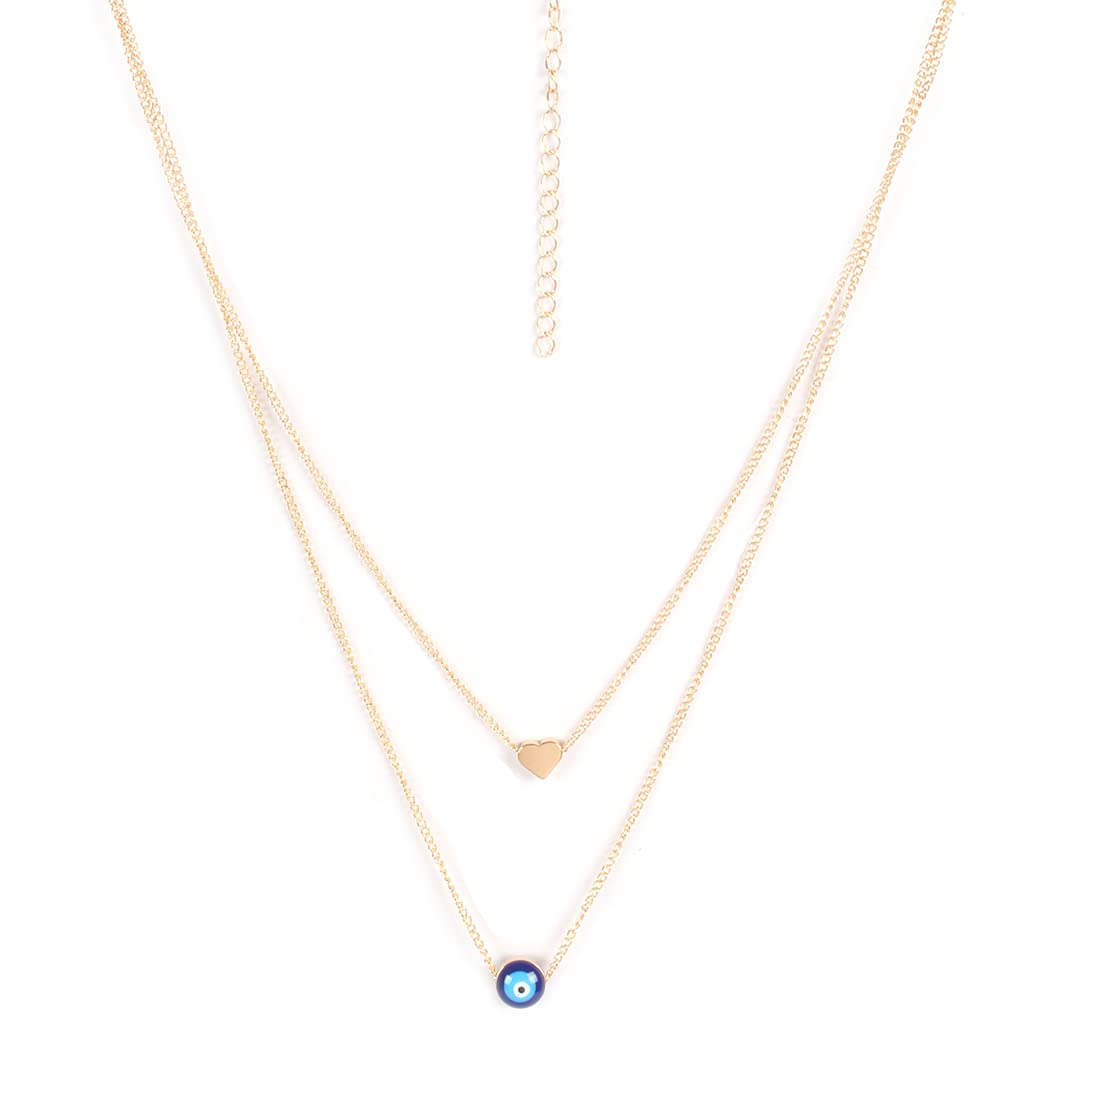 Buy Gold-toned Necklaces & Pendants for Women by The Pari Online